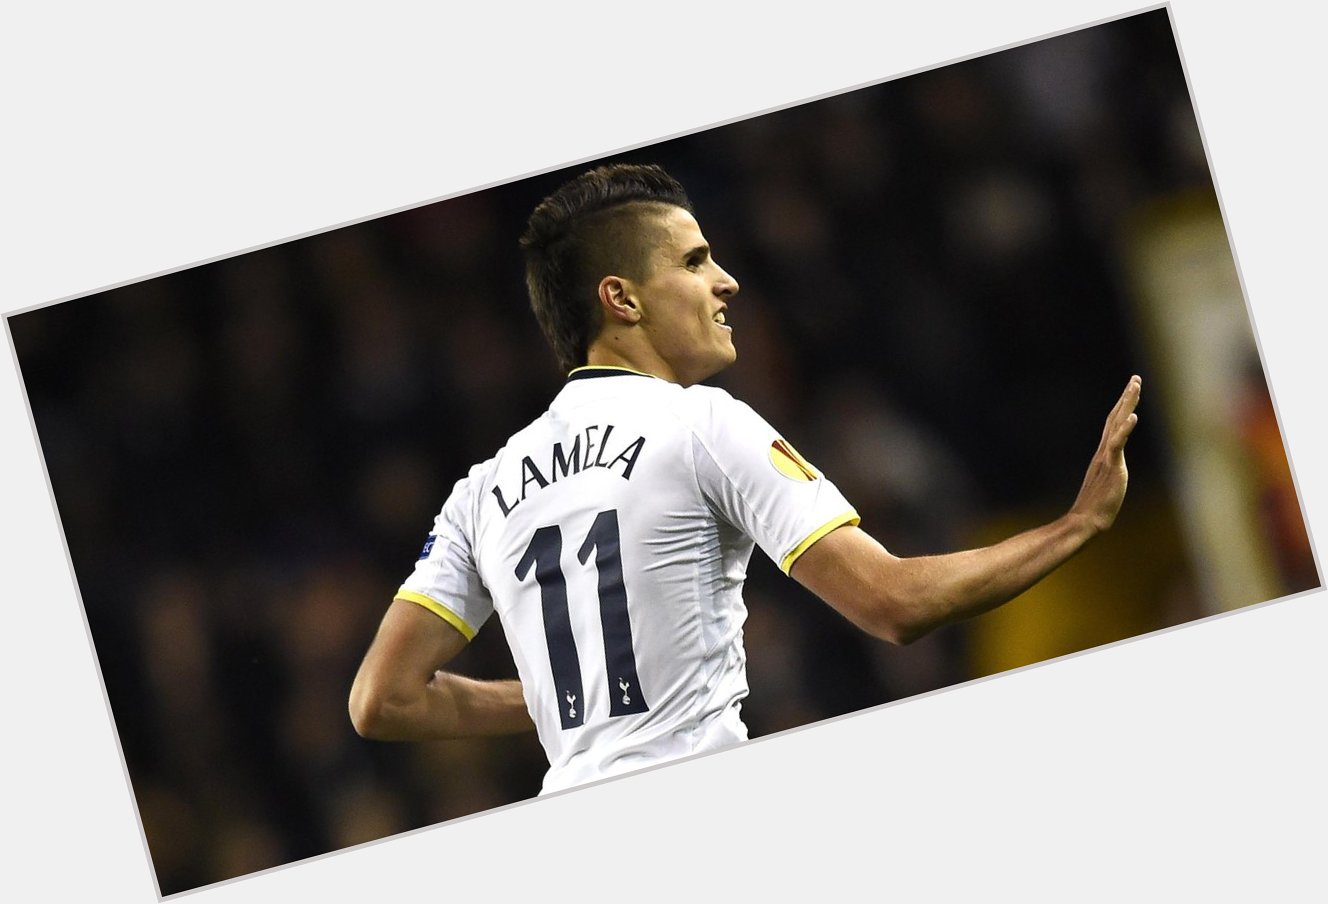 A very Happy Birthday to Erik Lamela! Have a great day and finish it with three points! 